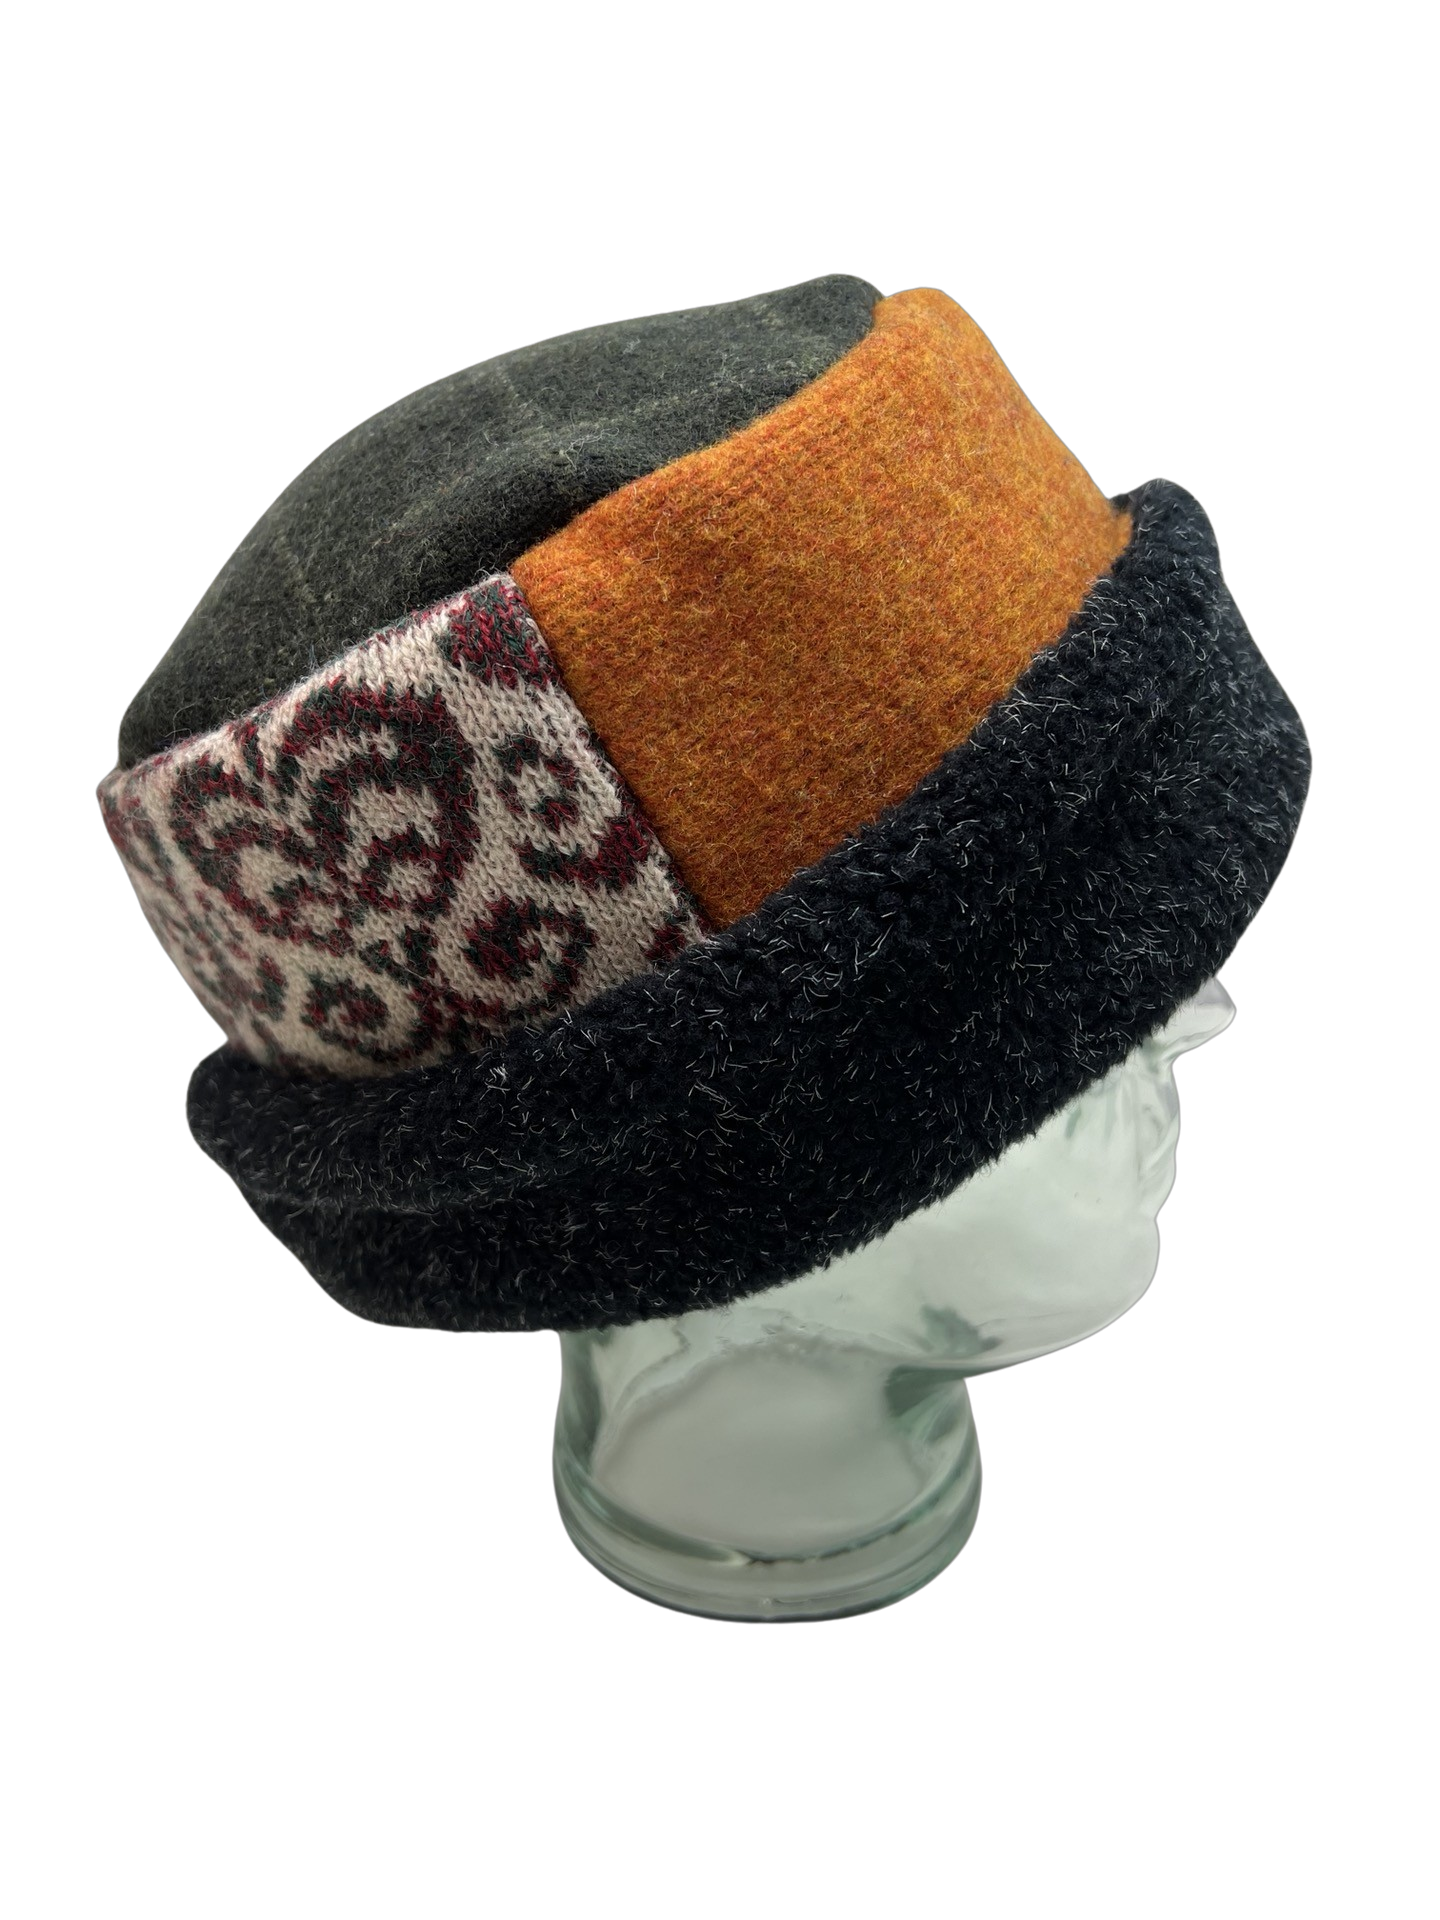 One of a Kind Pillbox Hat 171